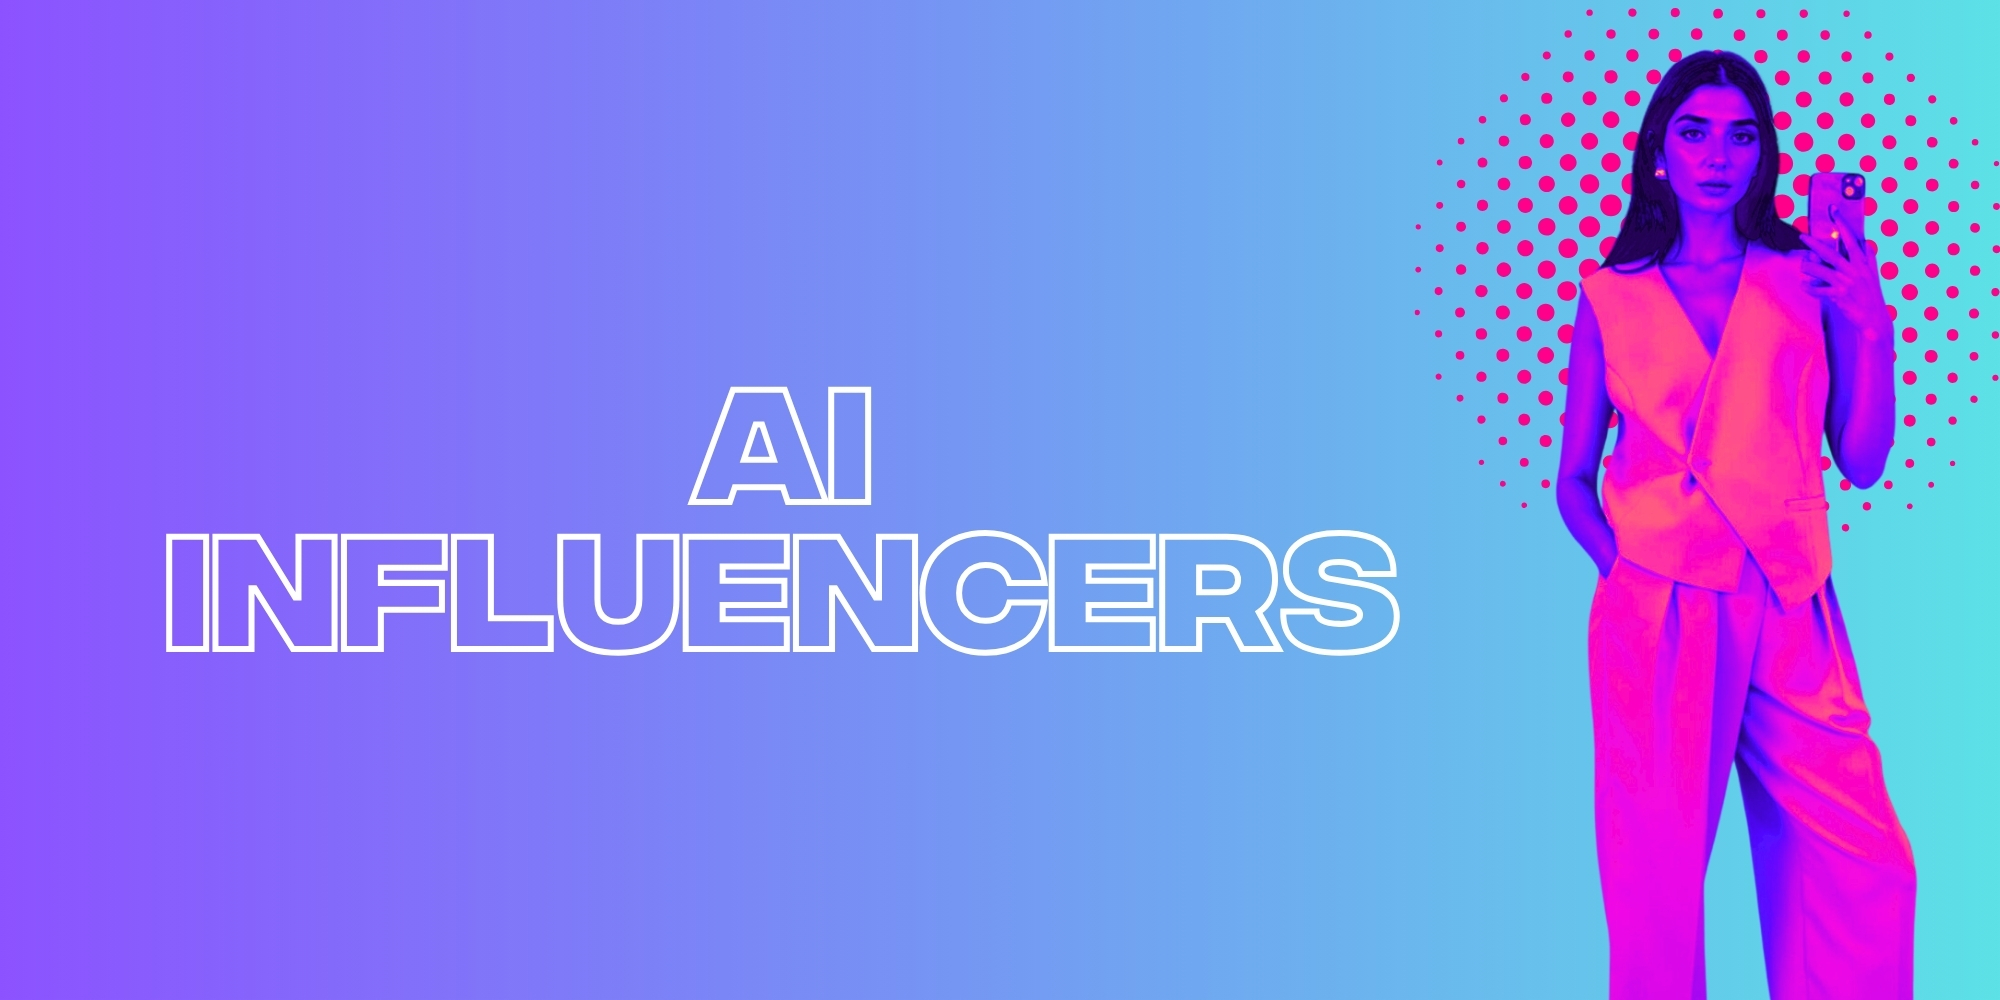 Where Do AI Influencers Fit In? Sheer Luxe Defends Their Use of New Virtual Influencer